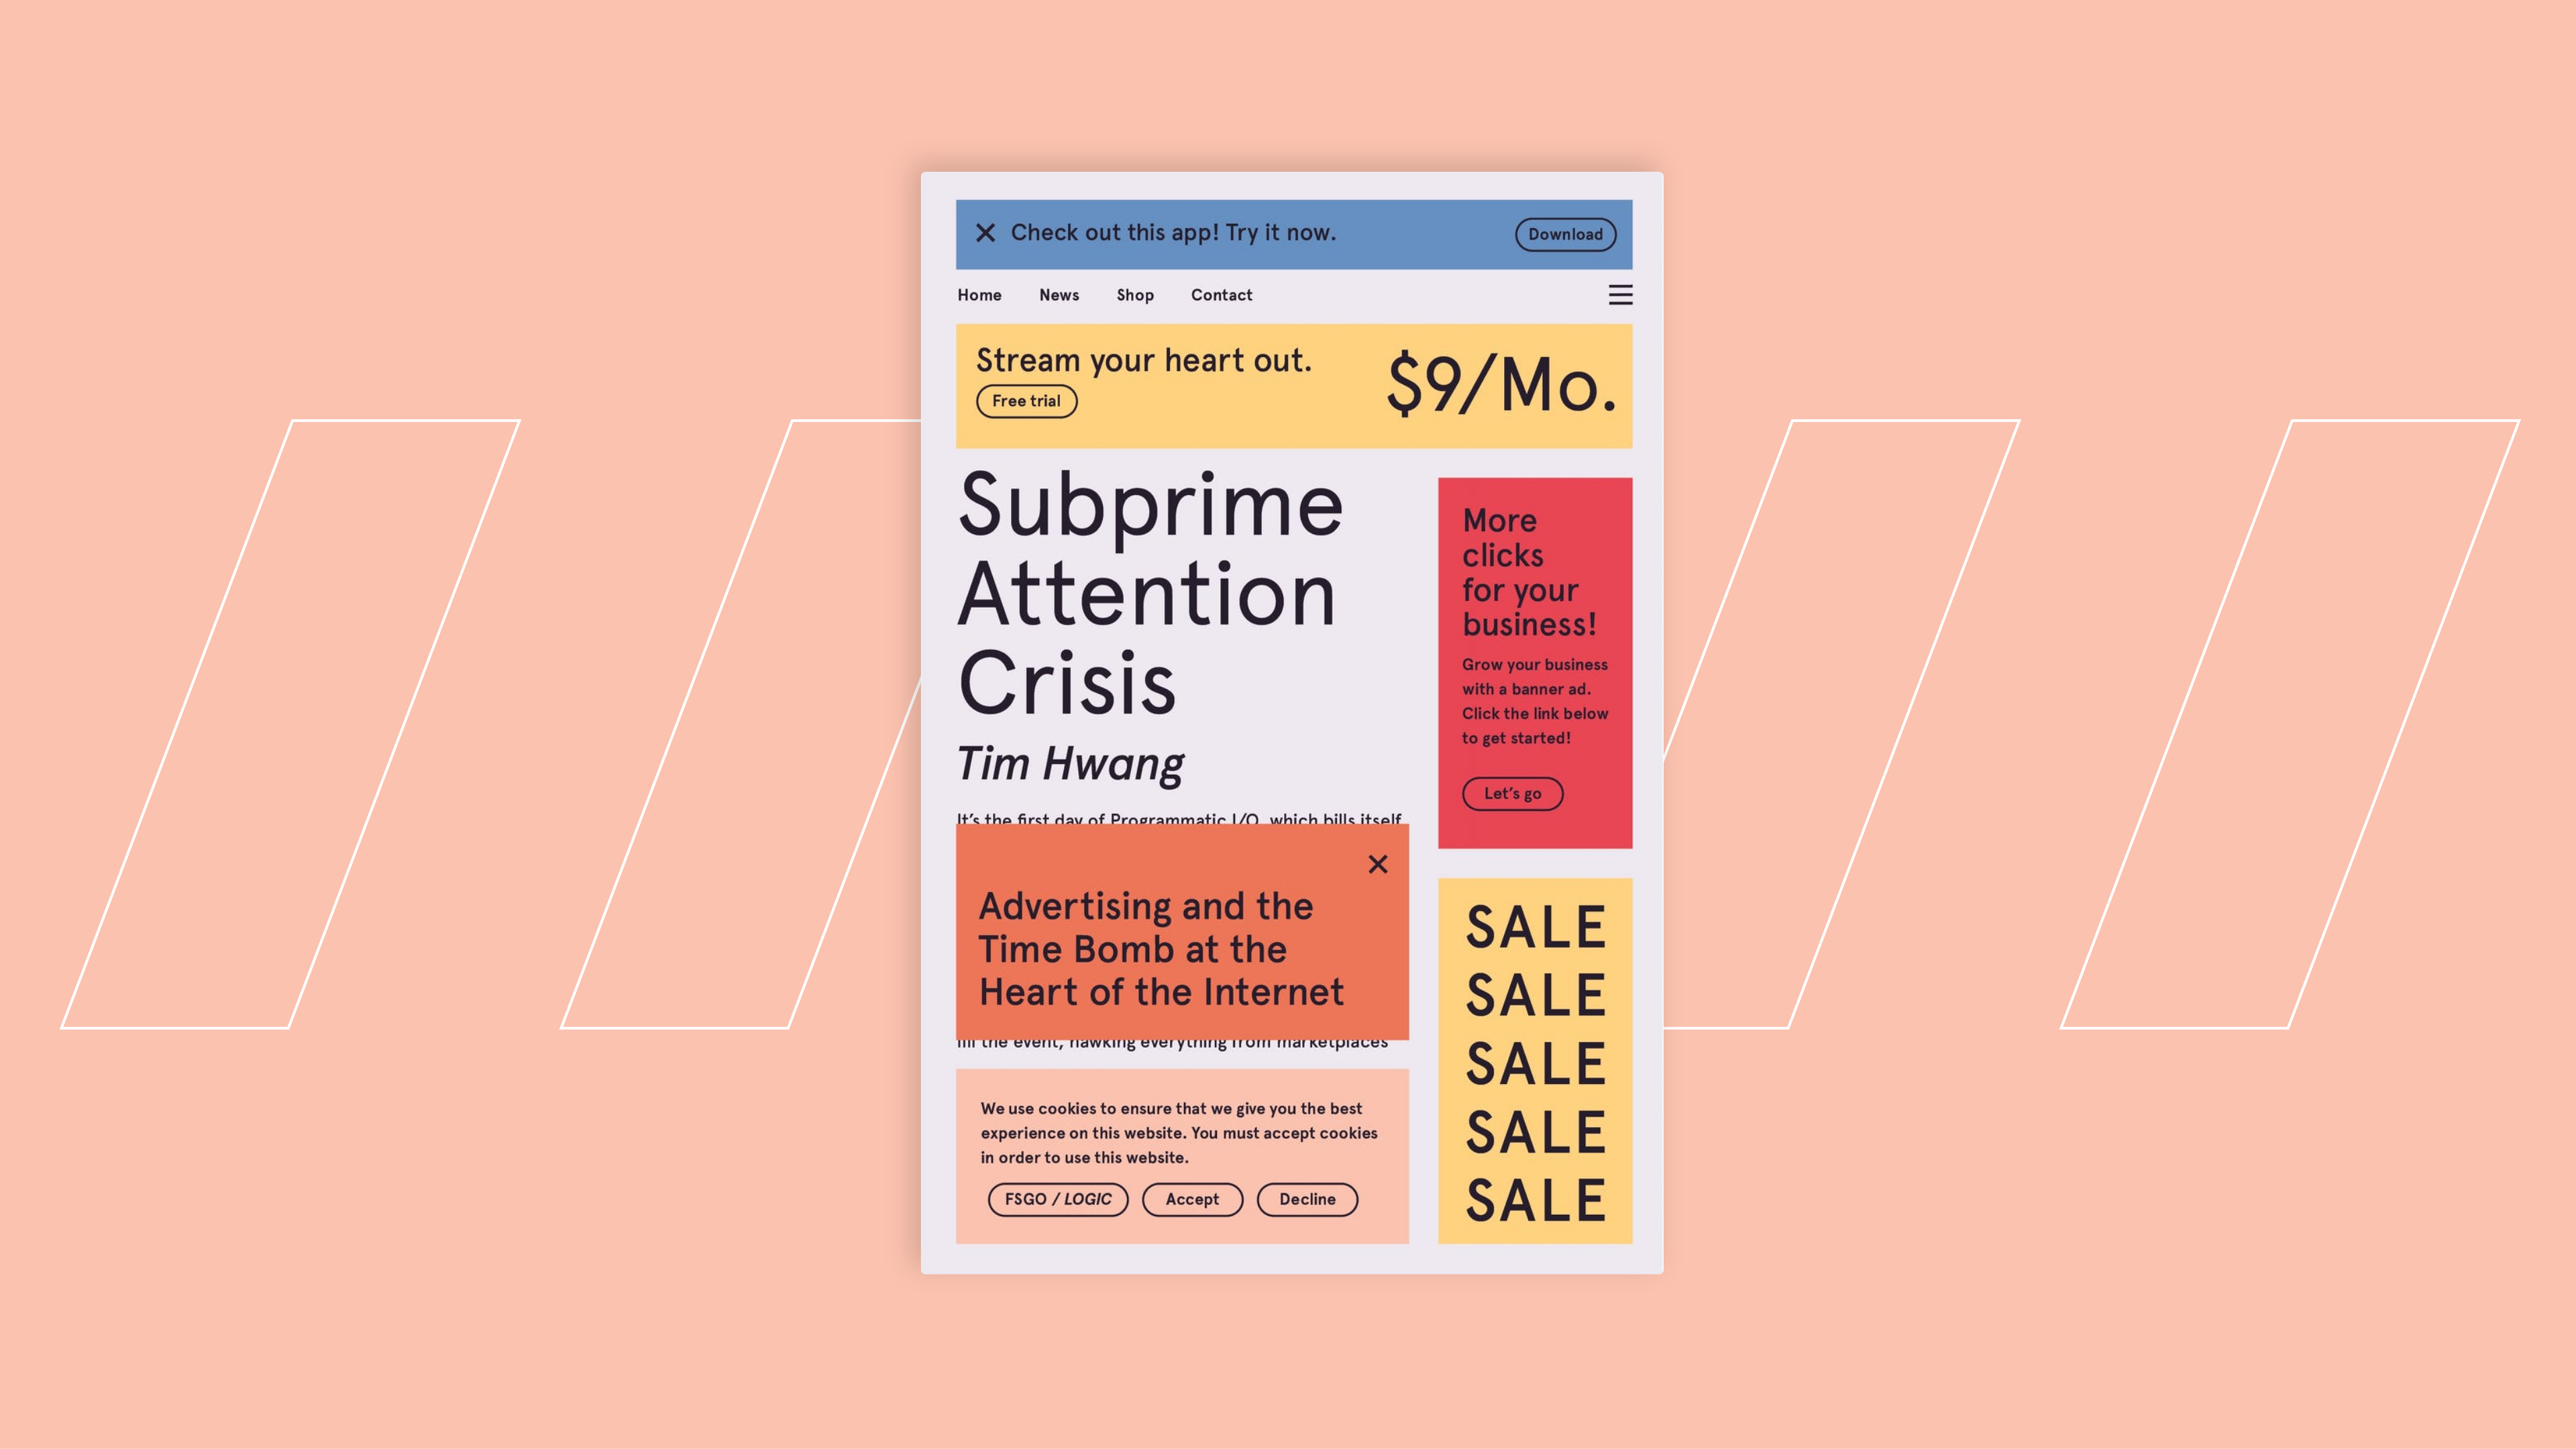 An image of the book Subprime Attention Crisis